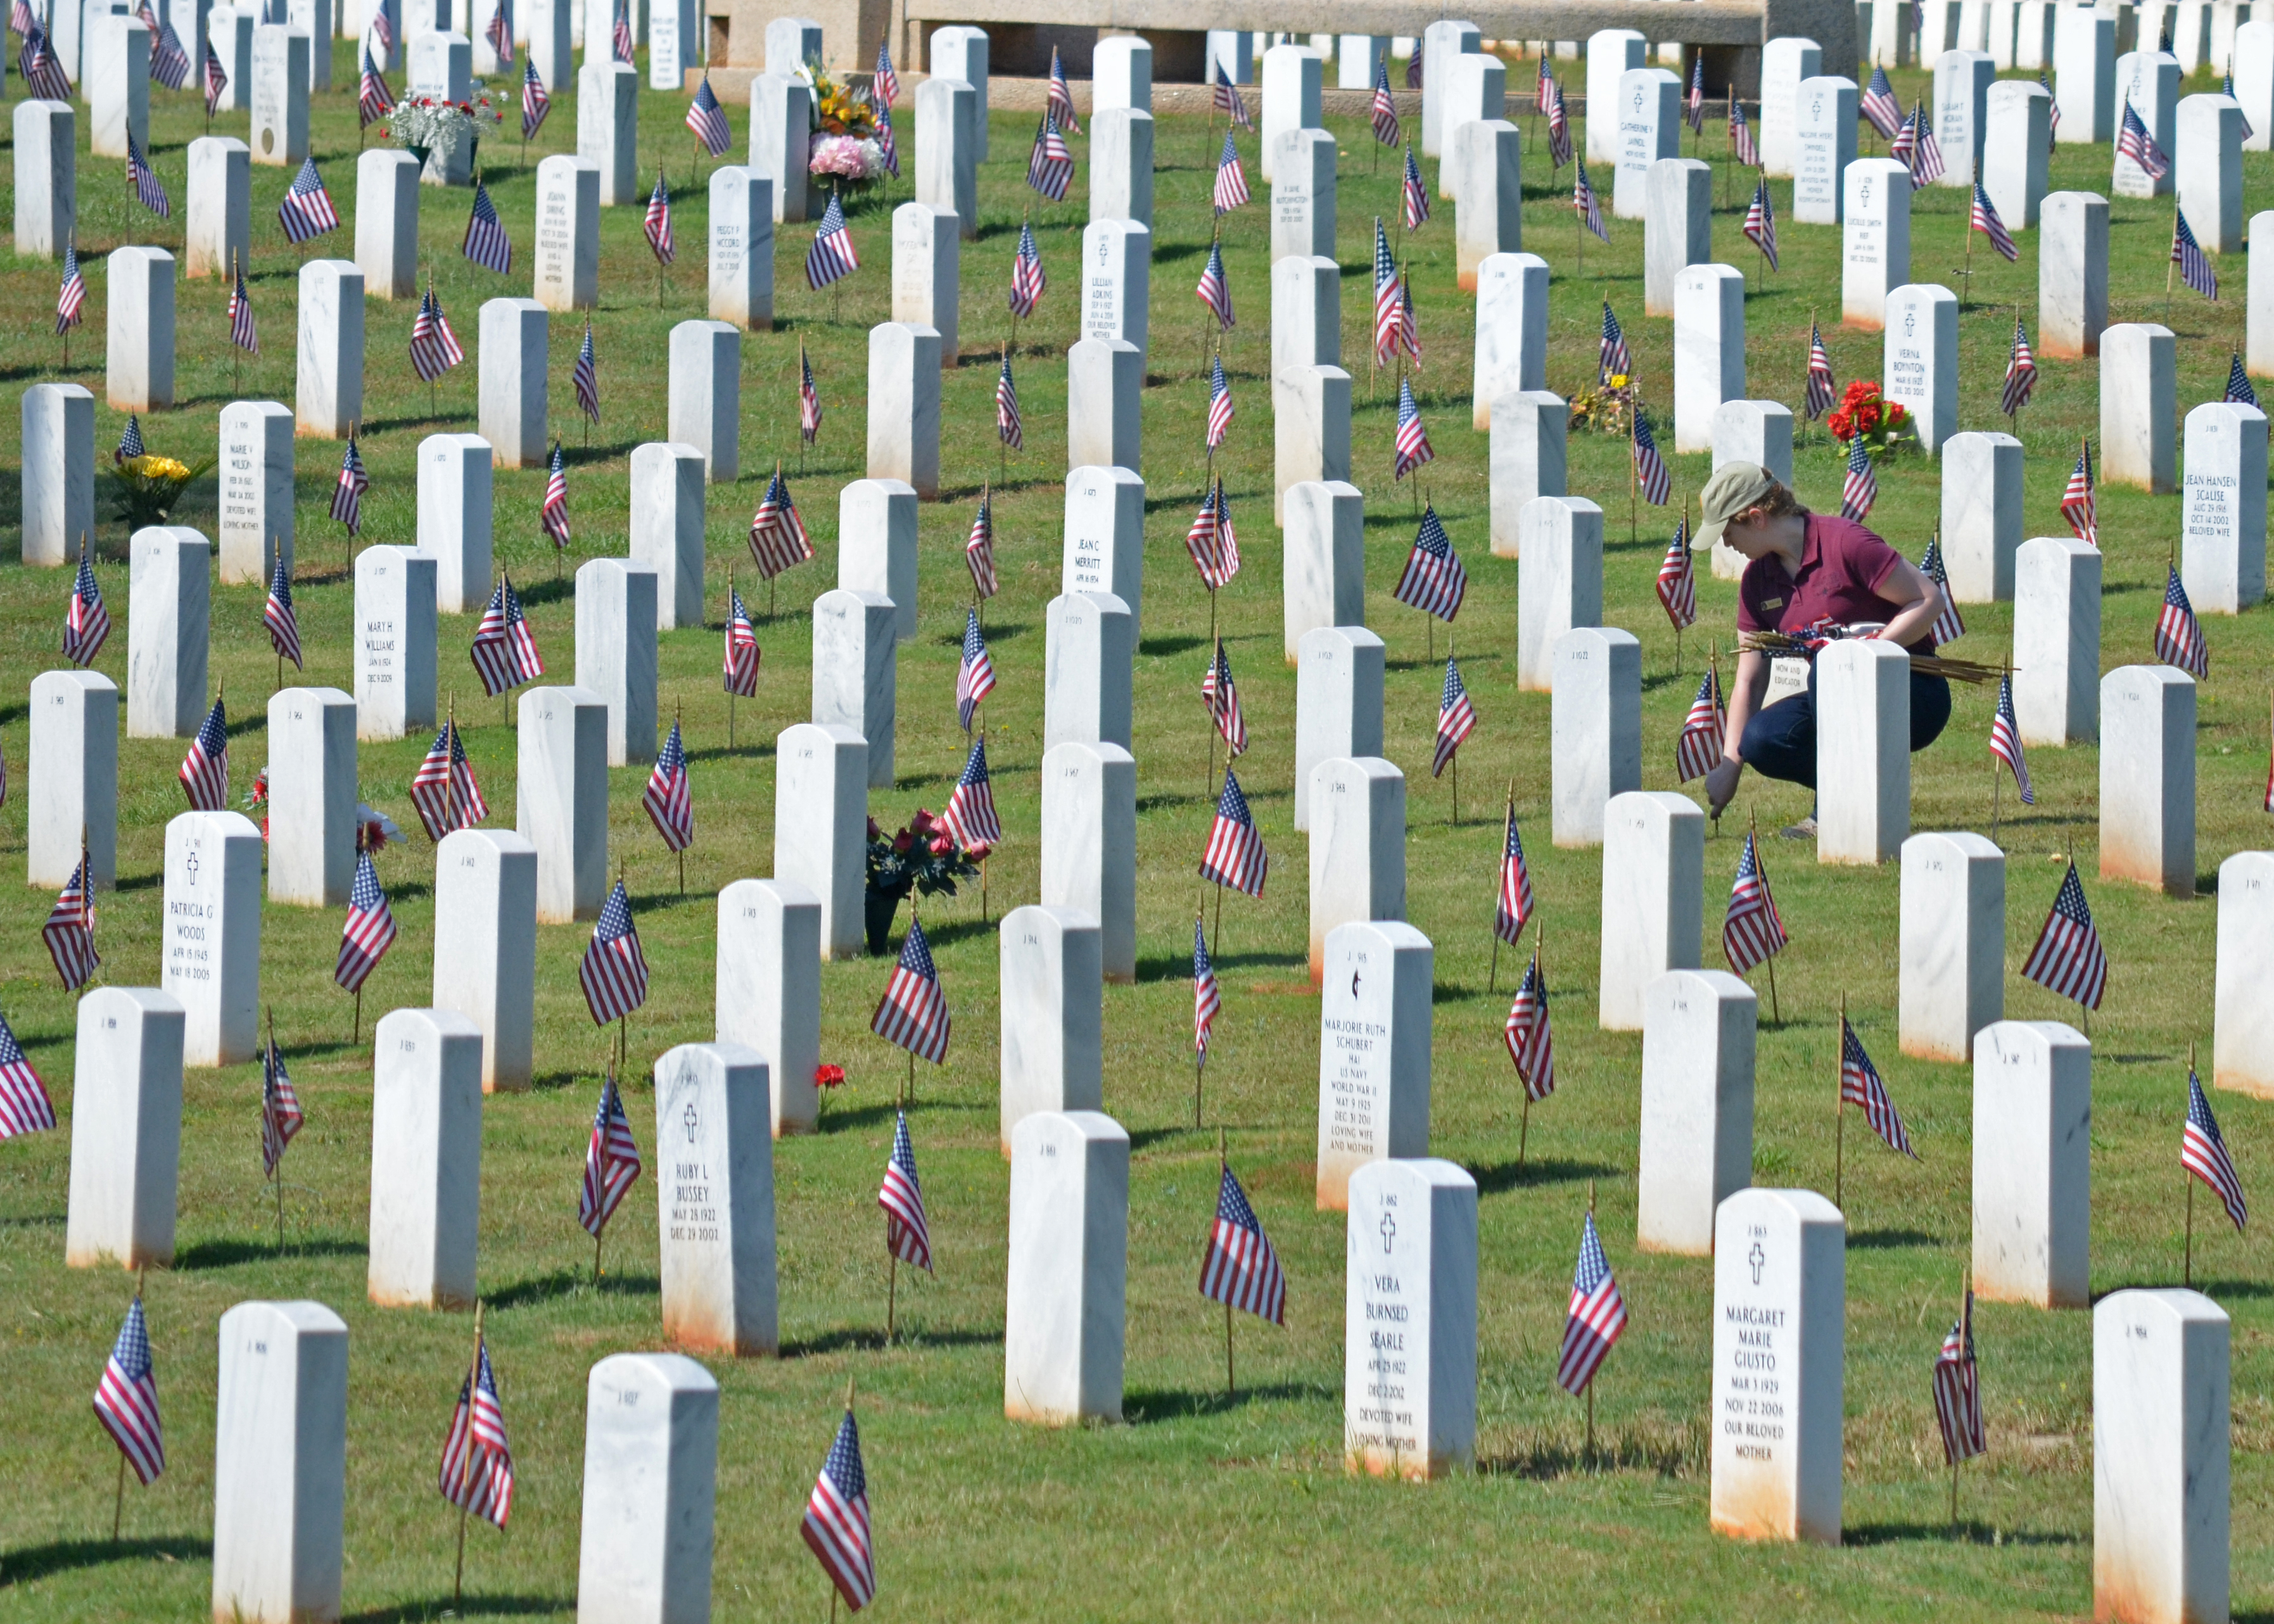 Rows of grave markers decorated with American flags. A woman crouches in front of grave stone and straightens a flag.